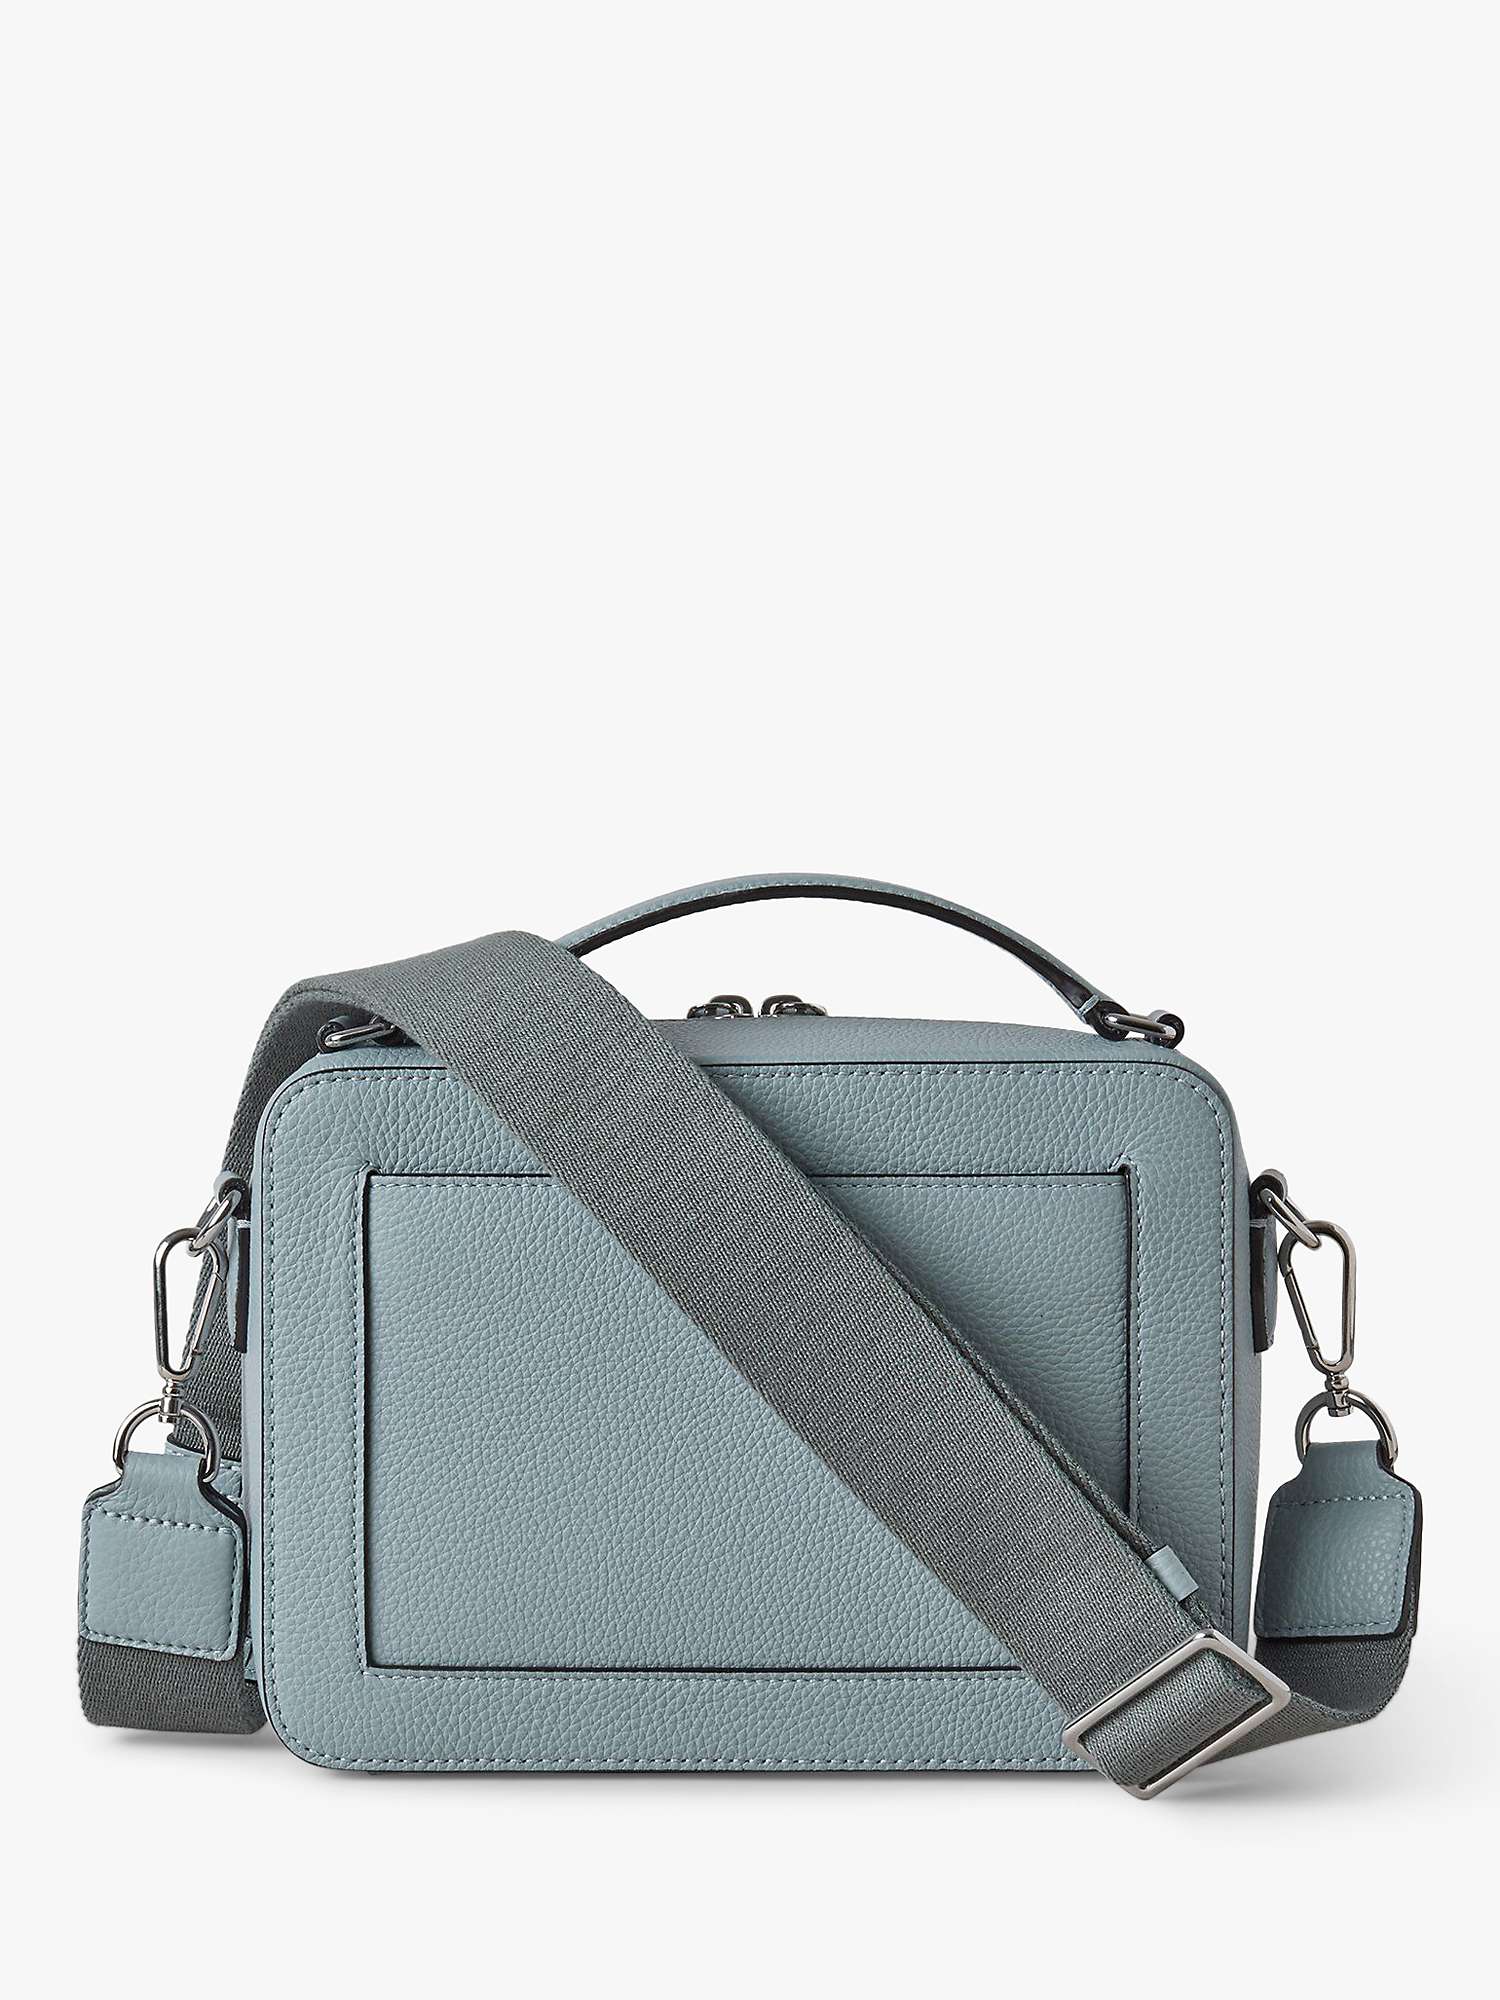 Buy Mulberry Belgrave Small Classic Grain Leather Cross Body Messenger Bag, Cloud Online at johnlewis.com